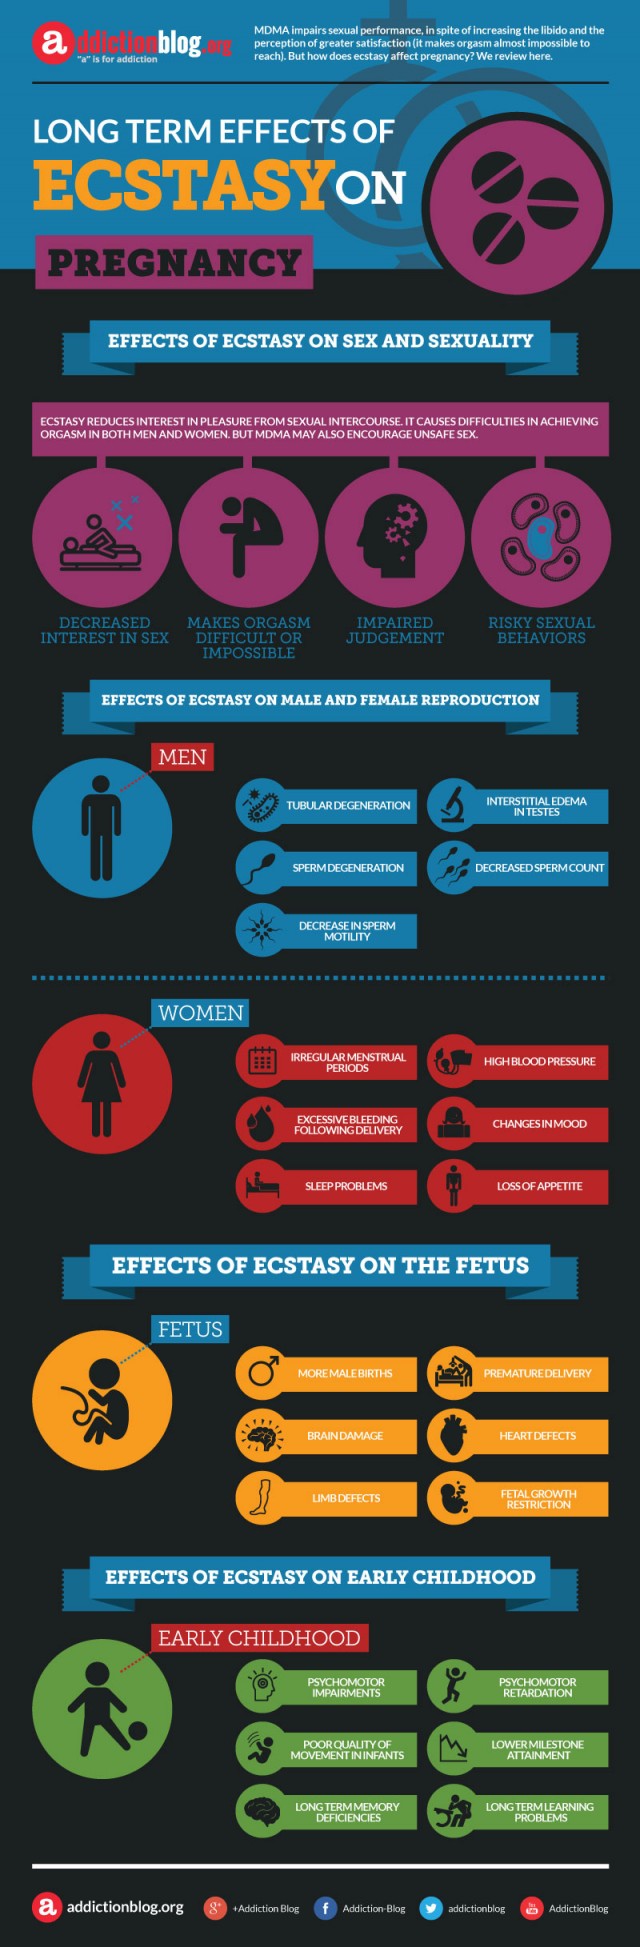 Effects of ecstasy on pregnancy (INFOGRAPHIC)